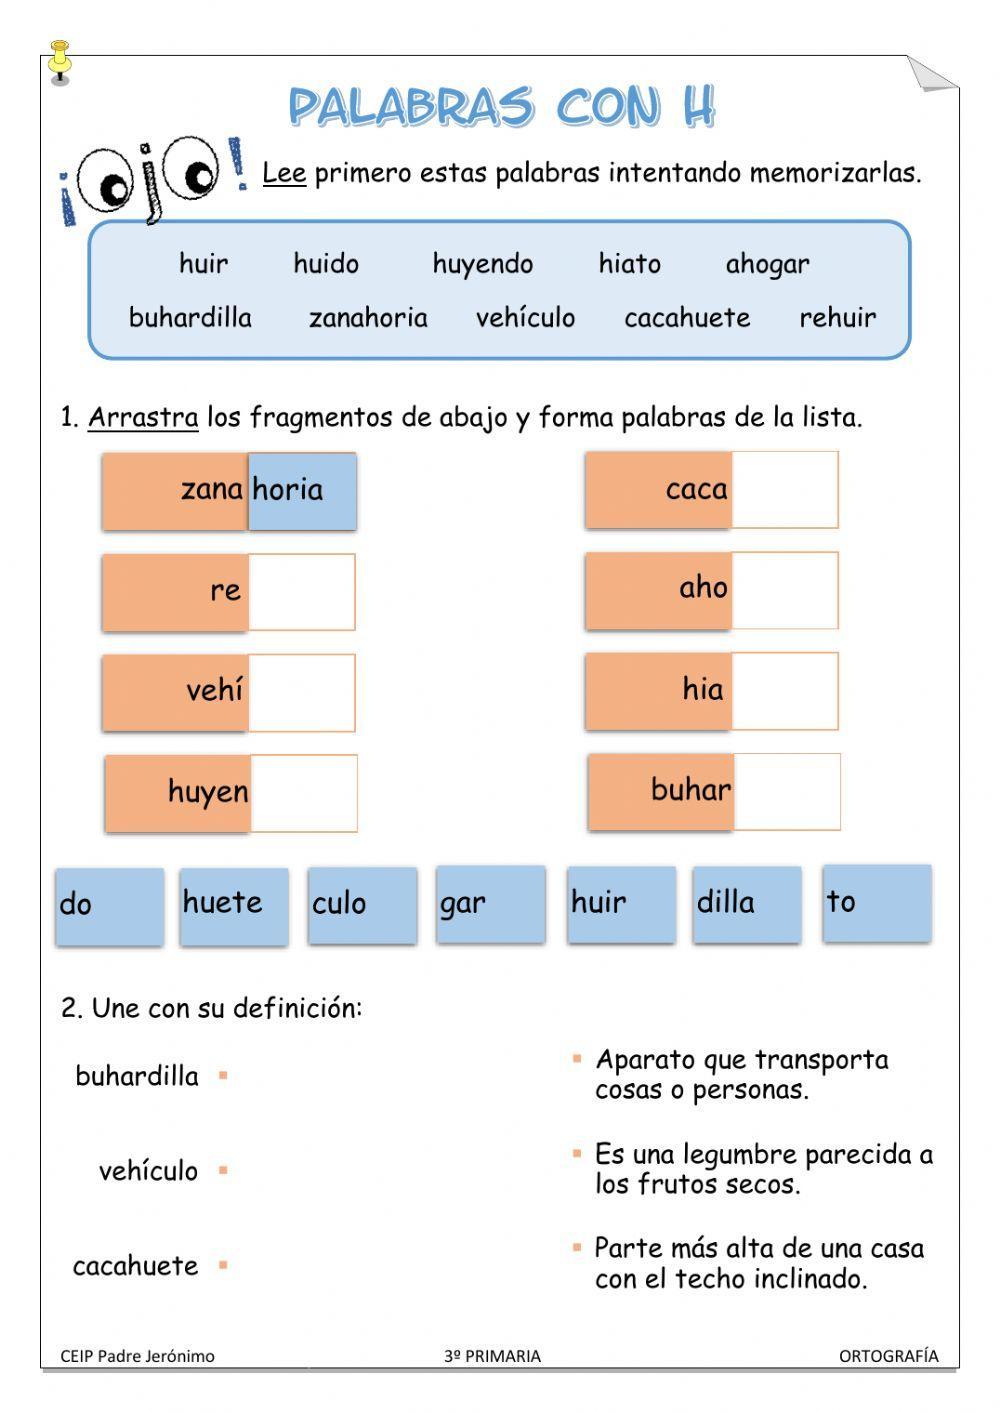 Palabras con h online pdf activity | Live Worksheets